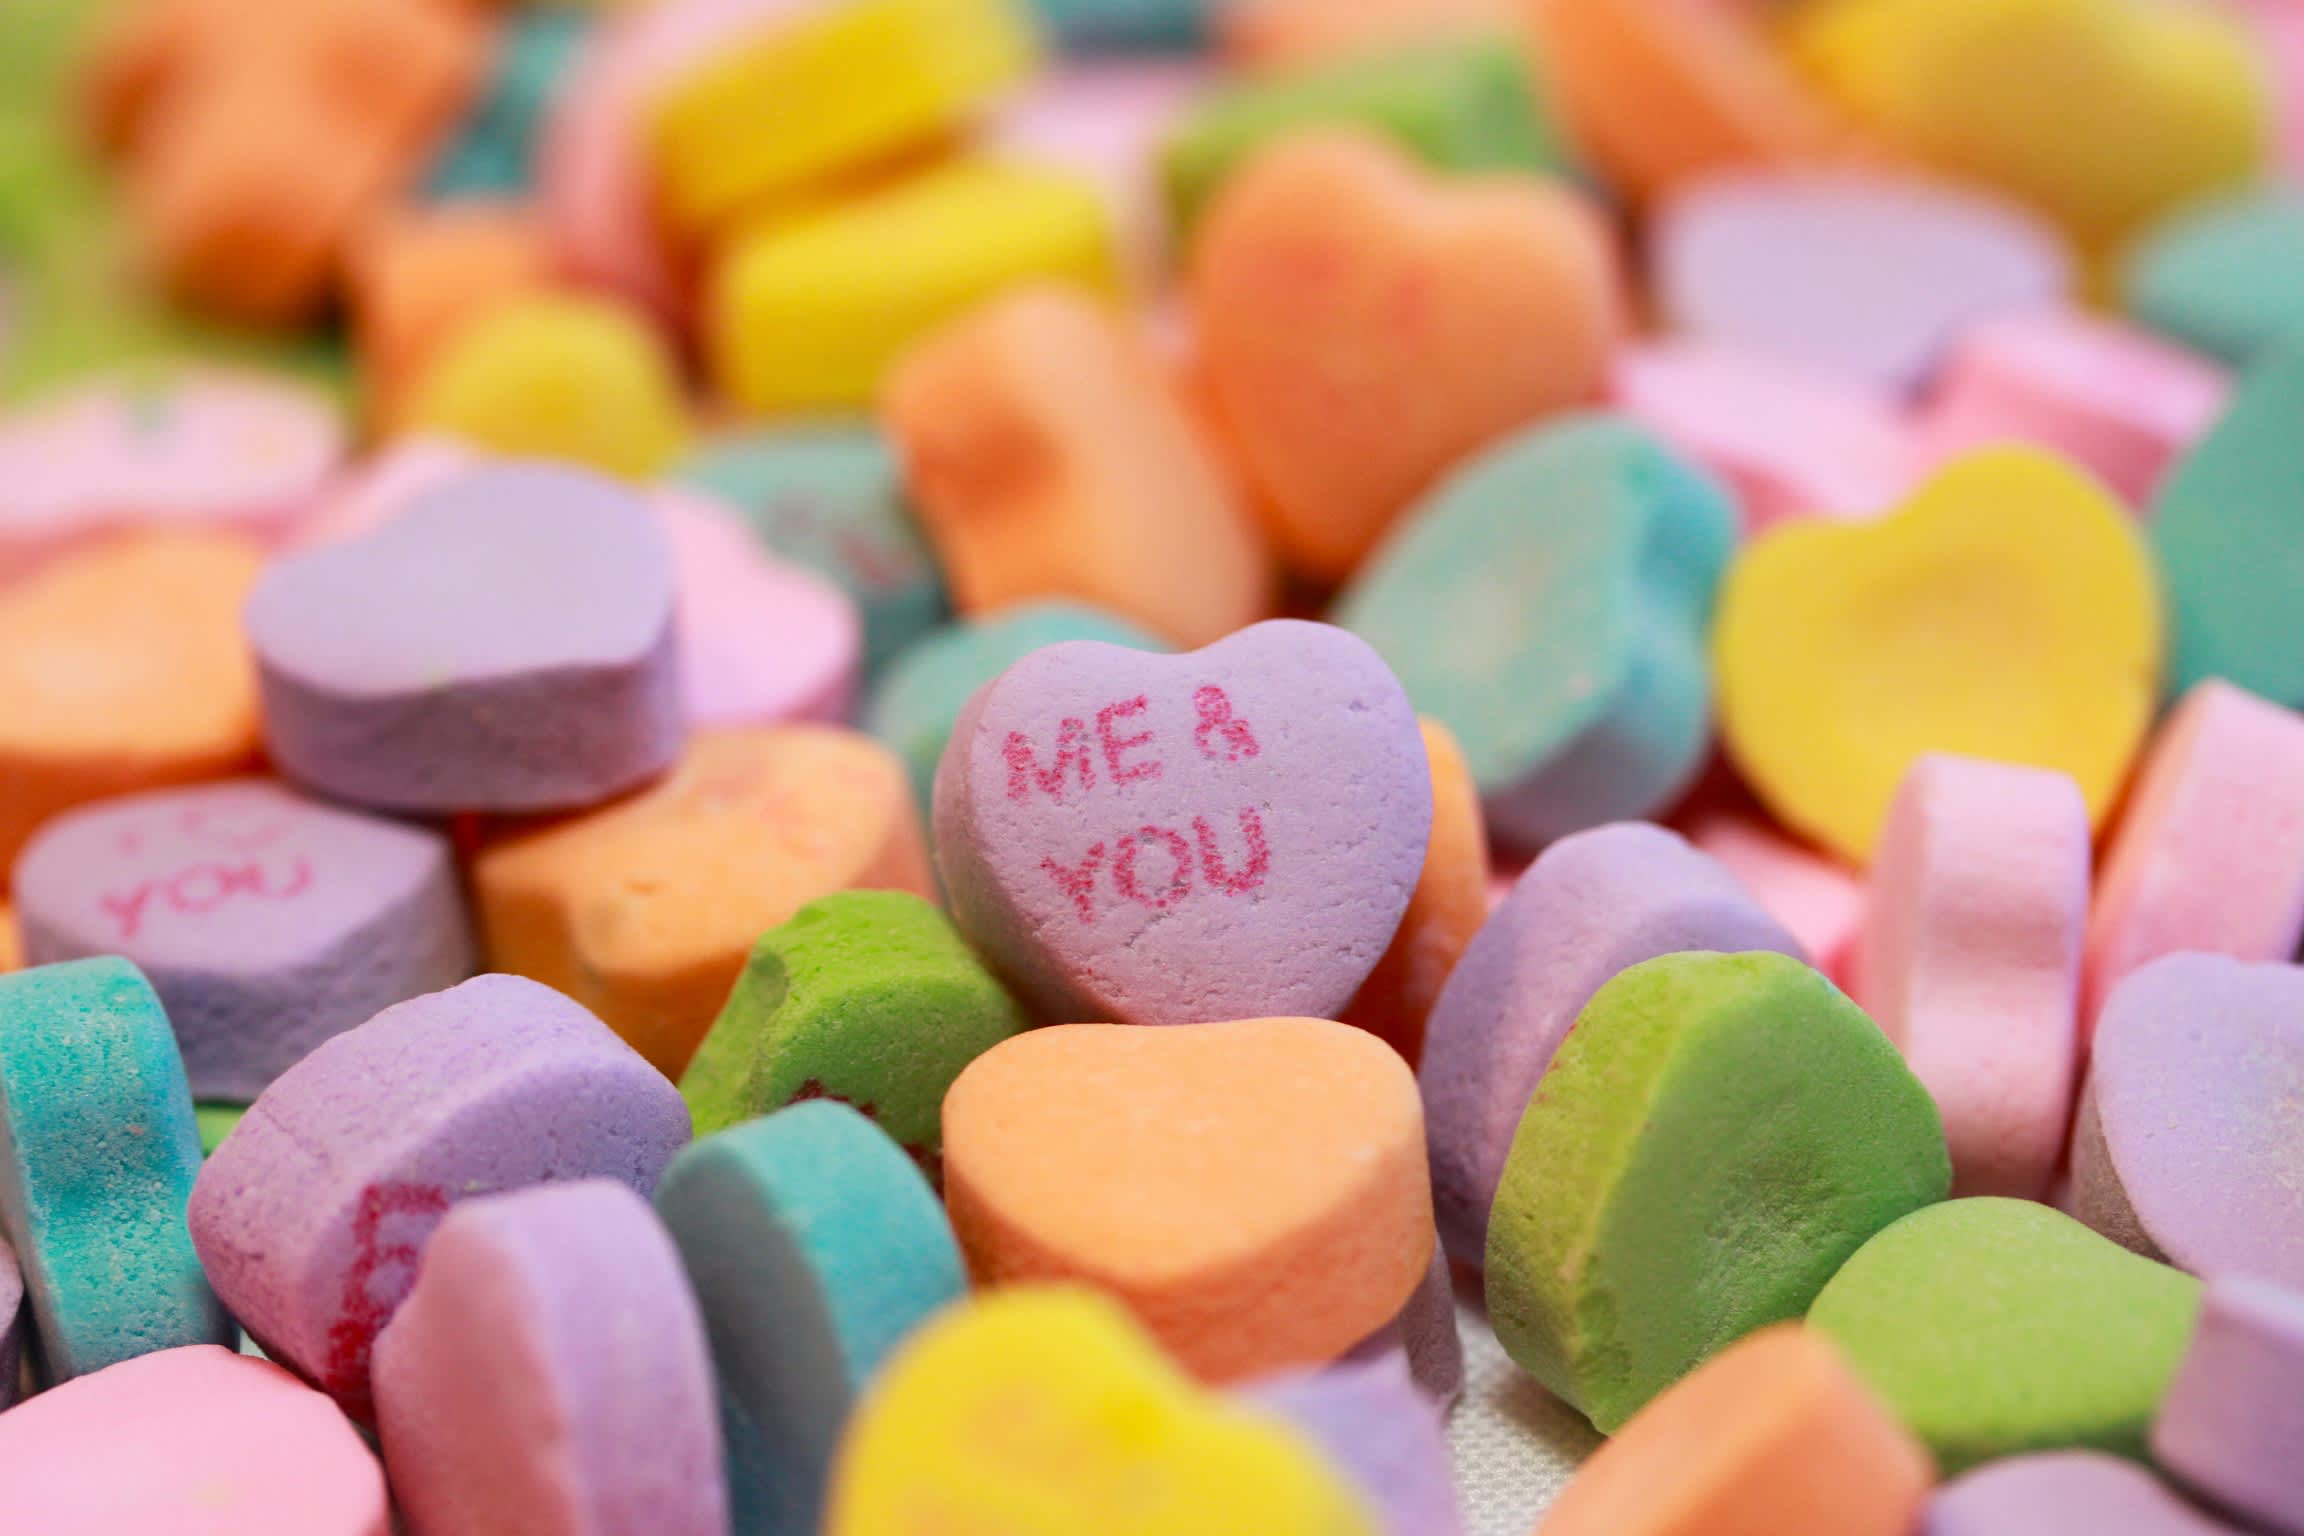 Funny Valentine's - Funny Valentine's Candy Hearts - Thrillist